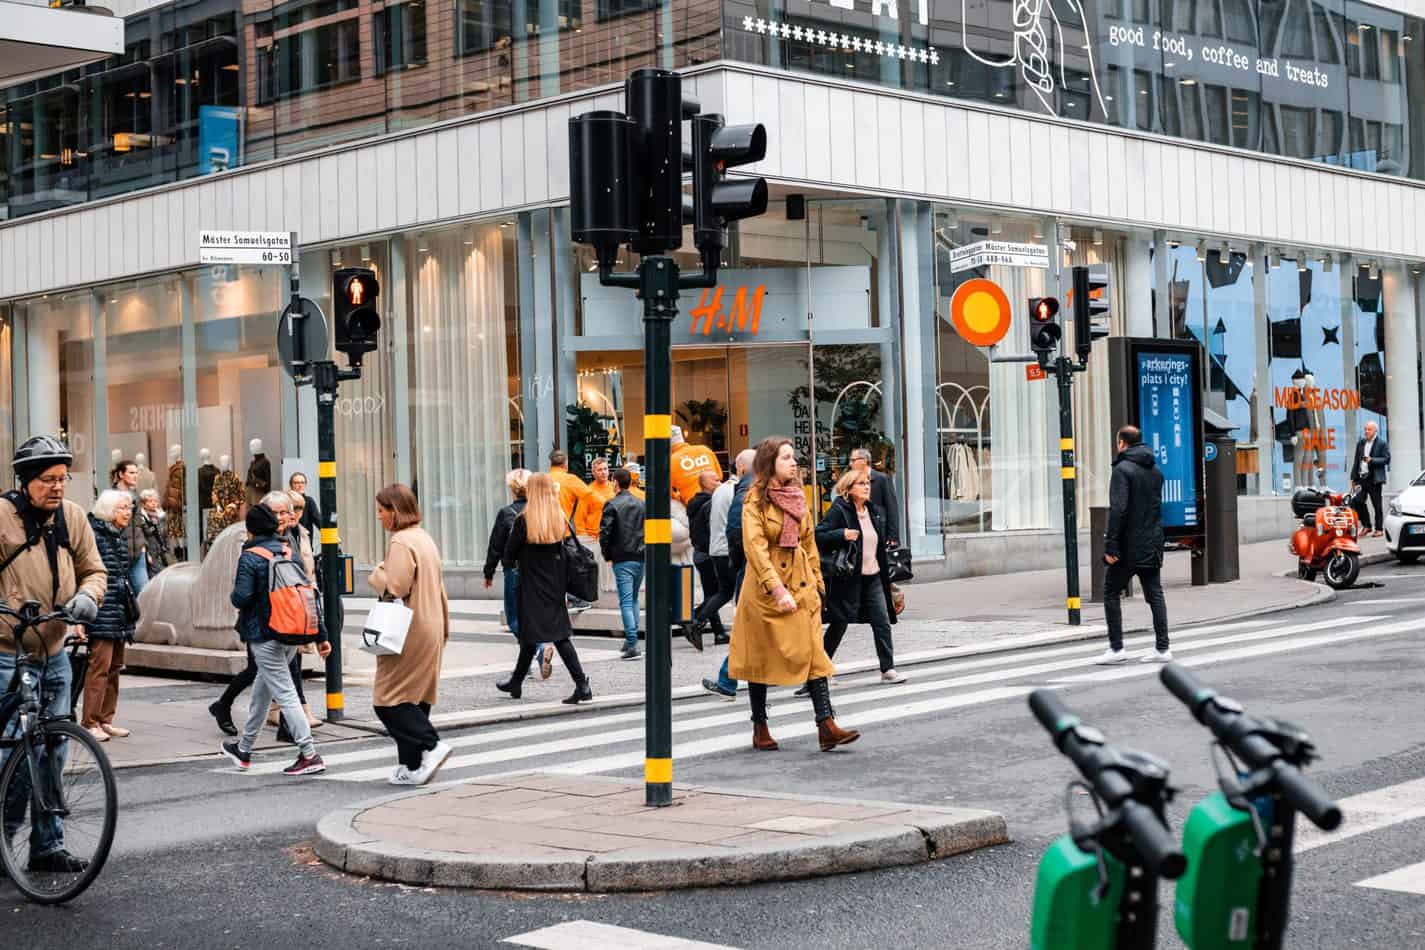 People crossing the road at traffic light